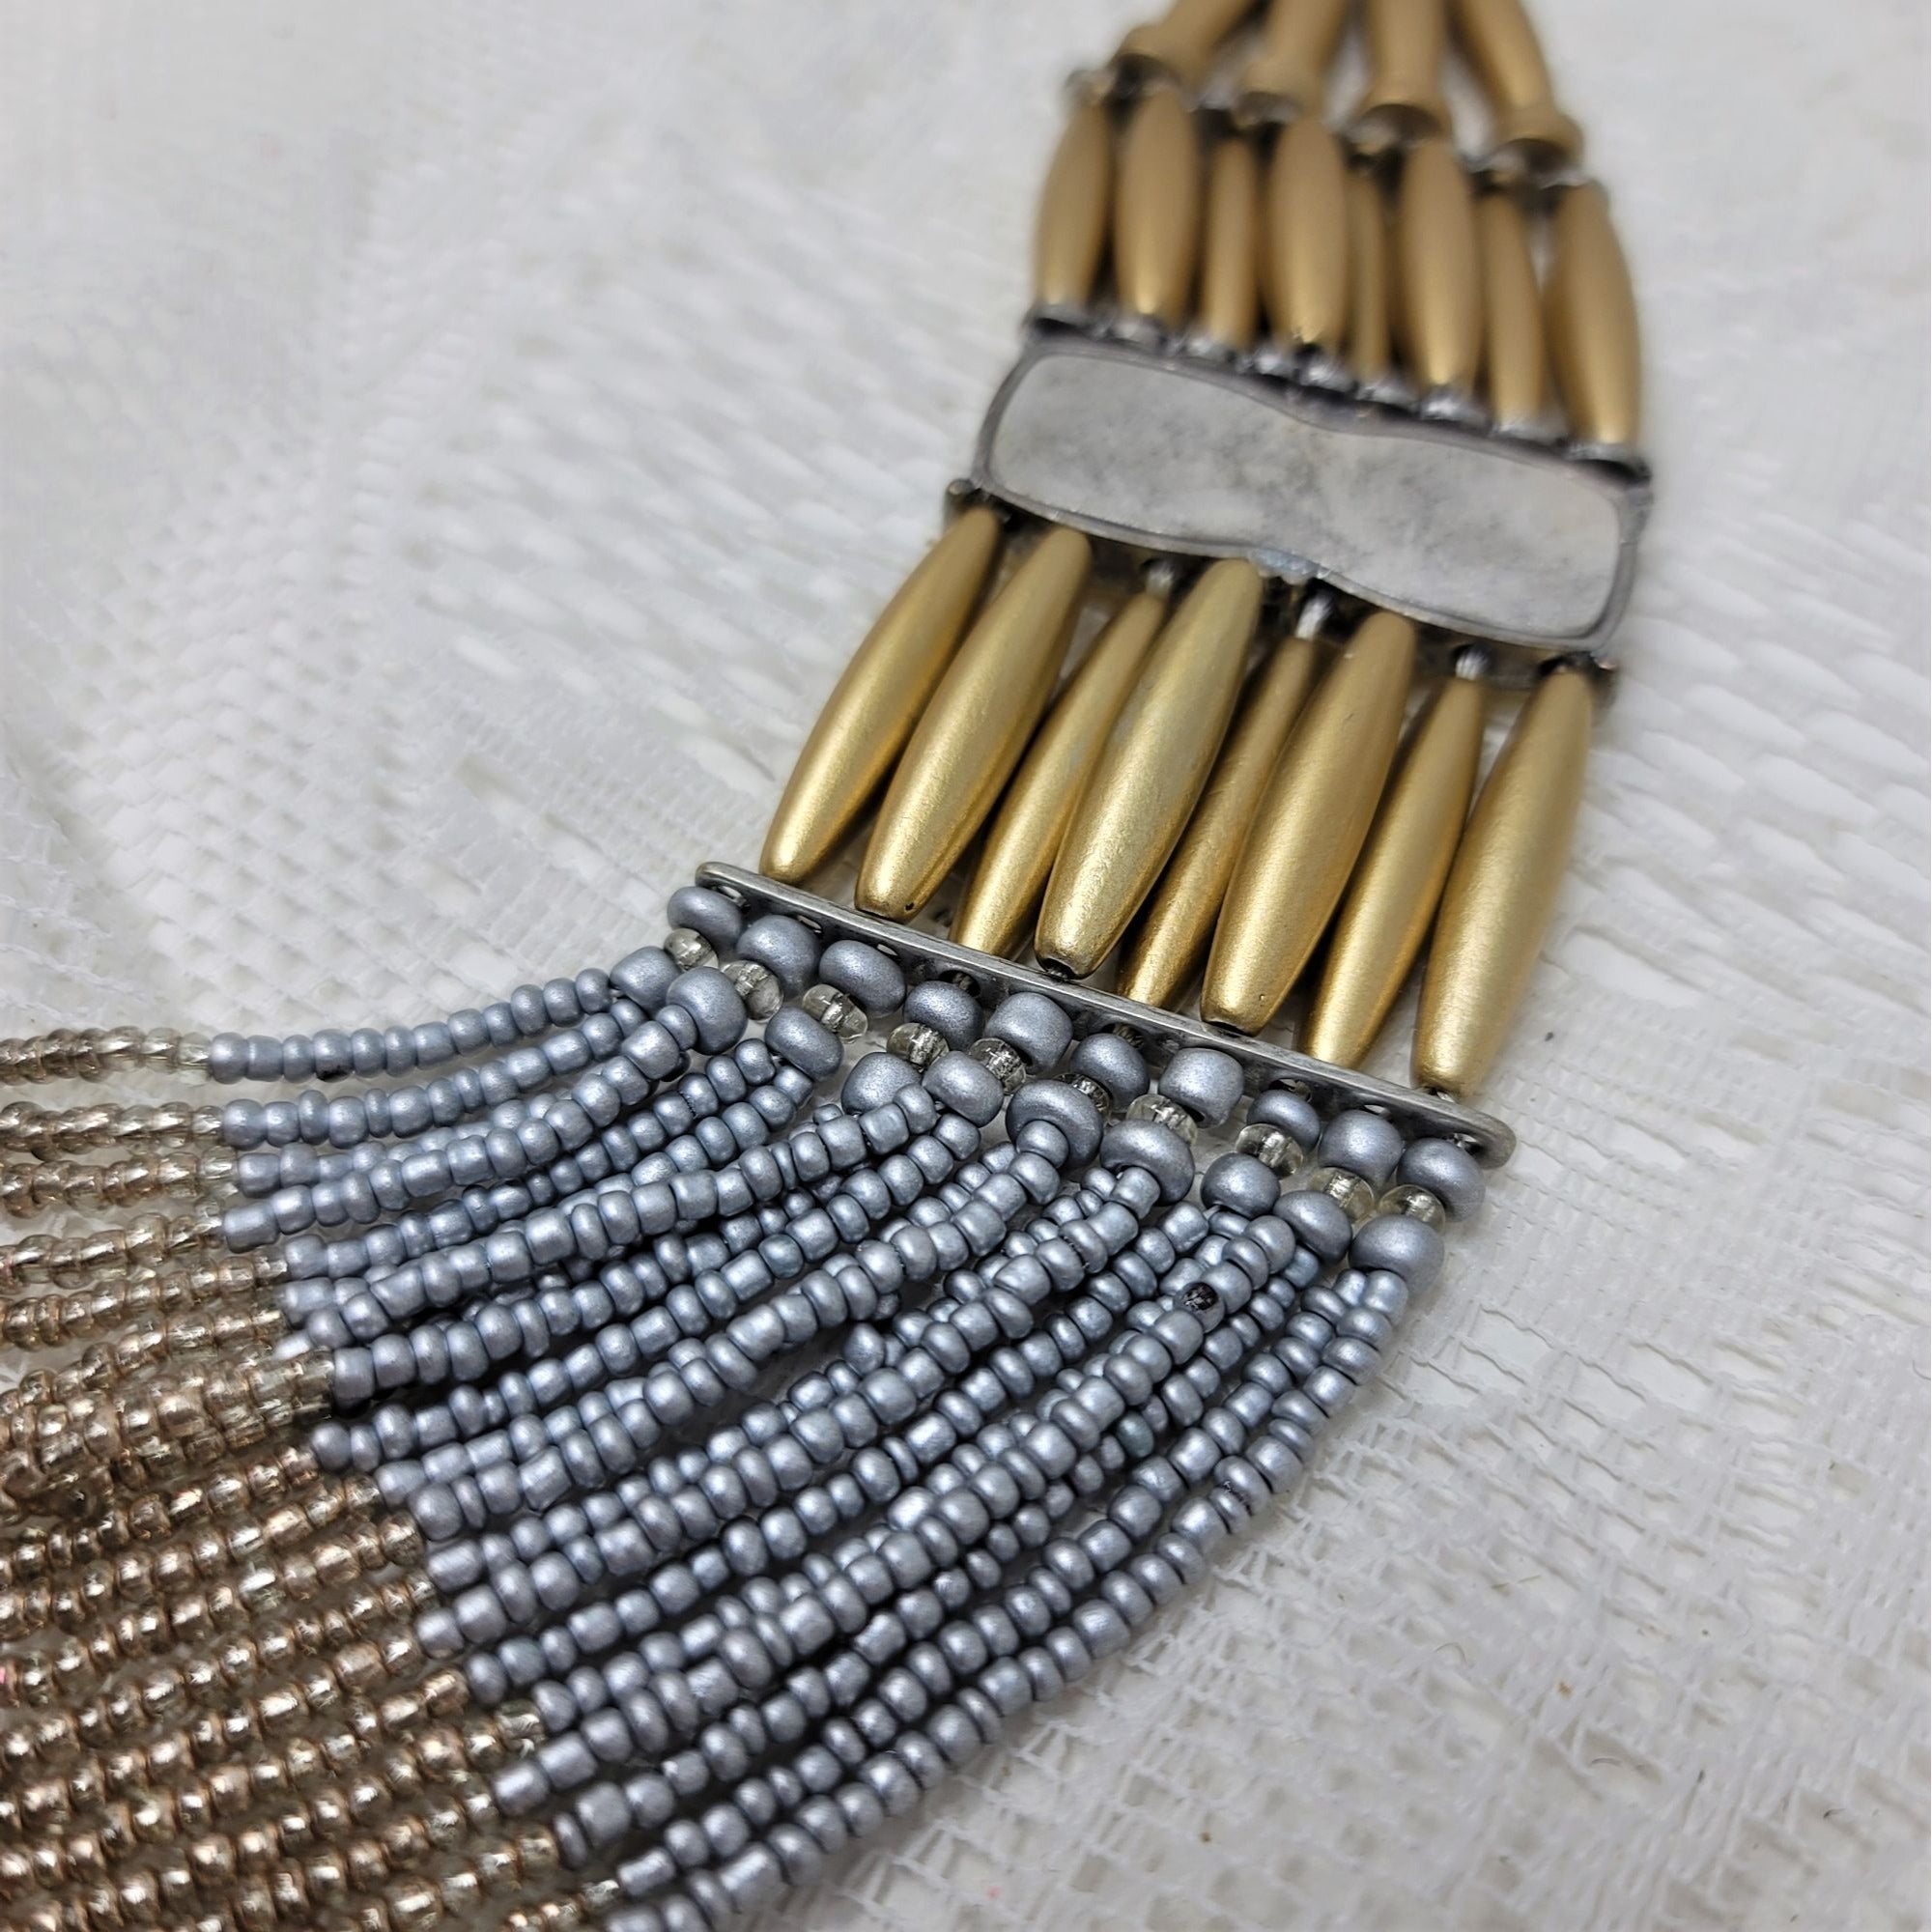 Elegant Silver & Gold 20 Strand Necklace Seed Beads